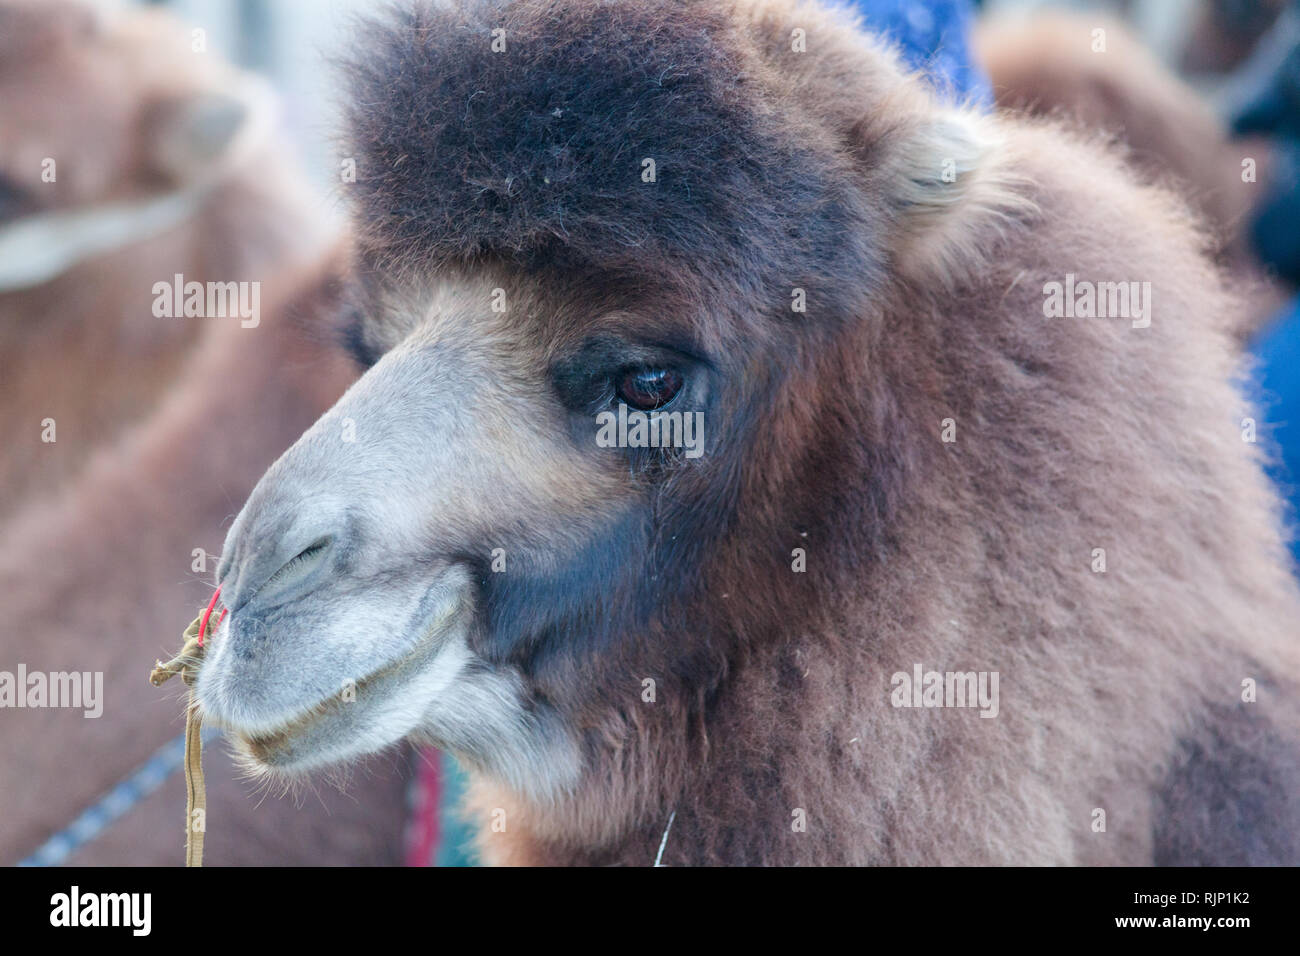 Bactrian camel (camelus bactrianus) used for camel rides for tourists in the area of Hunder, Nubra Valley, Ladakh, Jammu and Kashmir, India Stock Photo